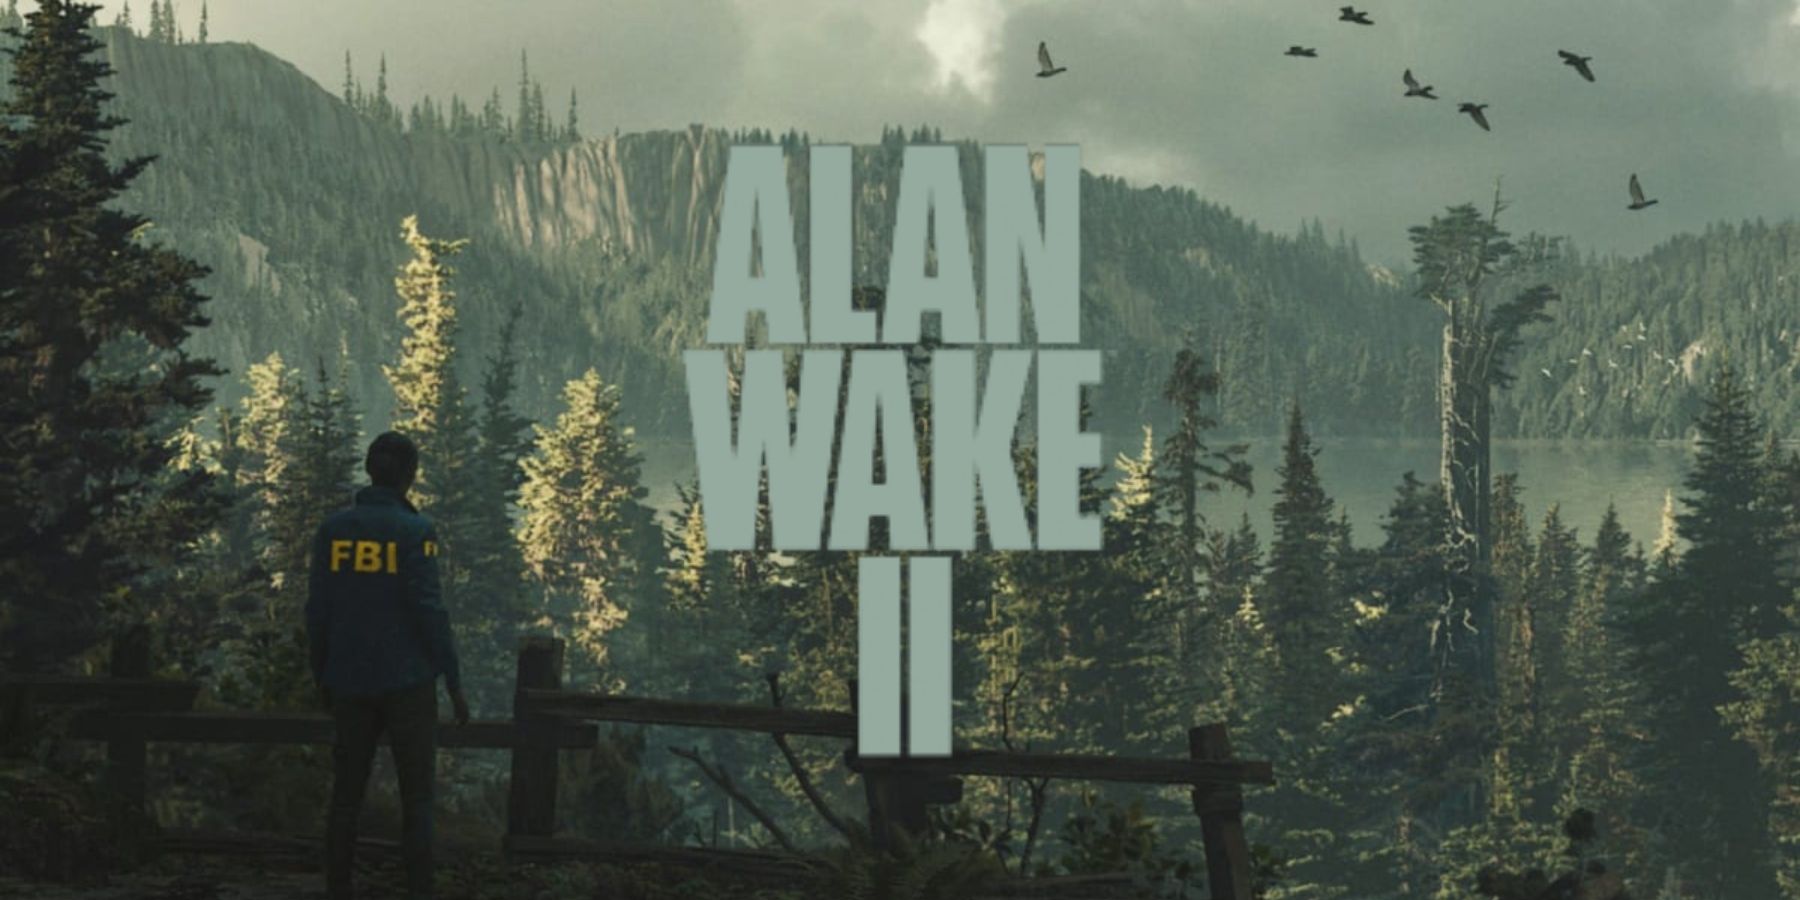 Is Alan Wake 2 Digital Only?